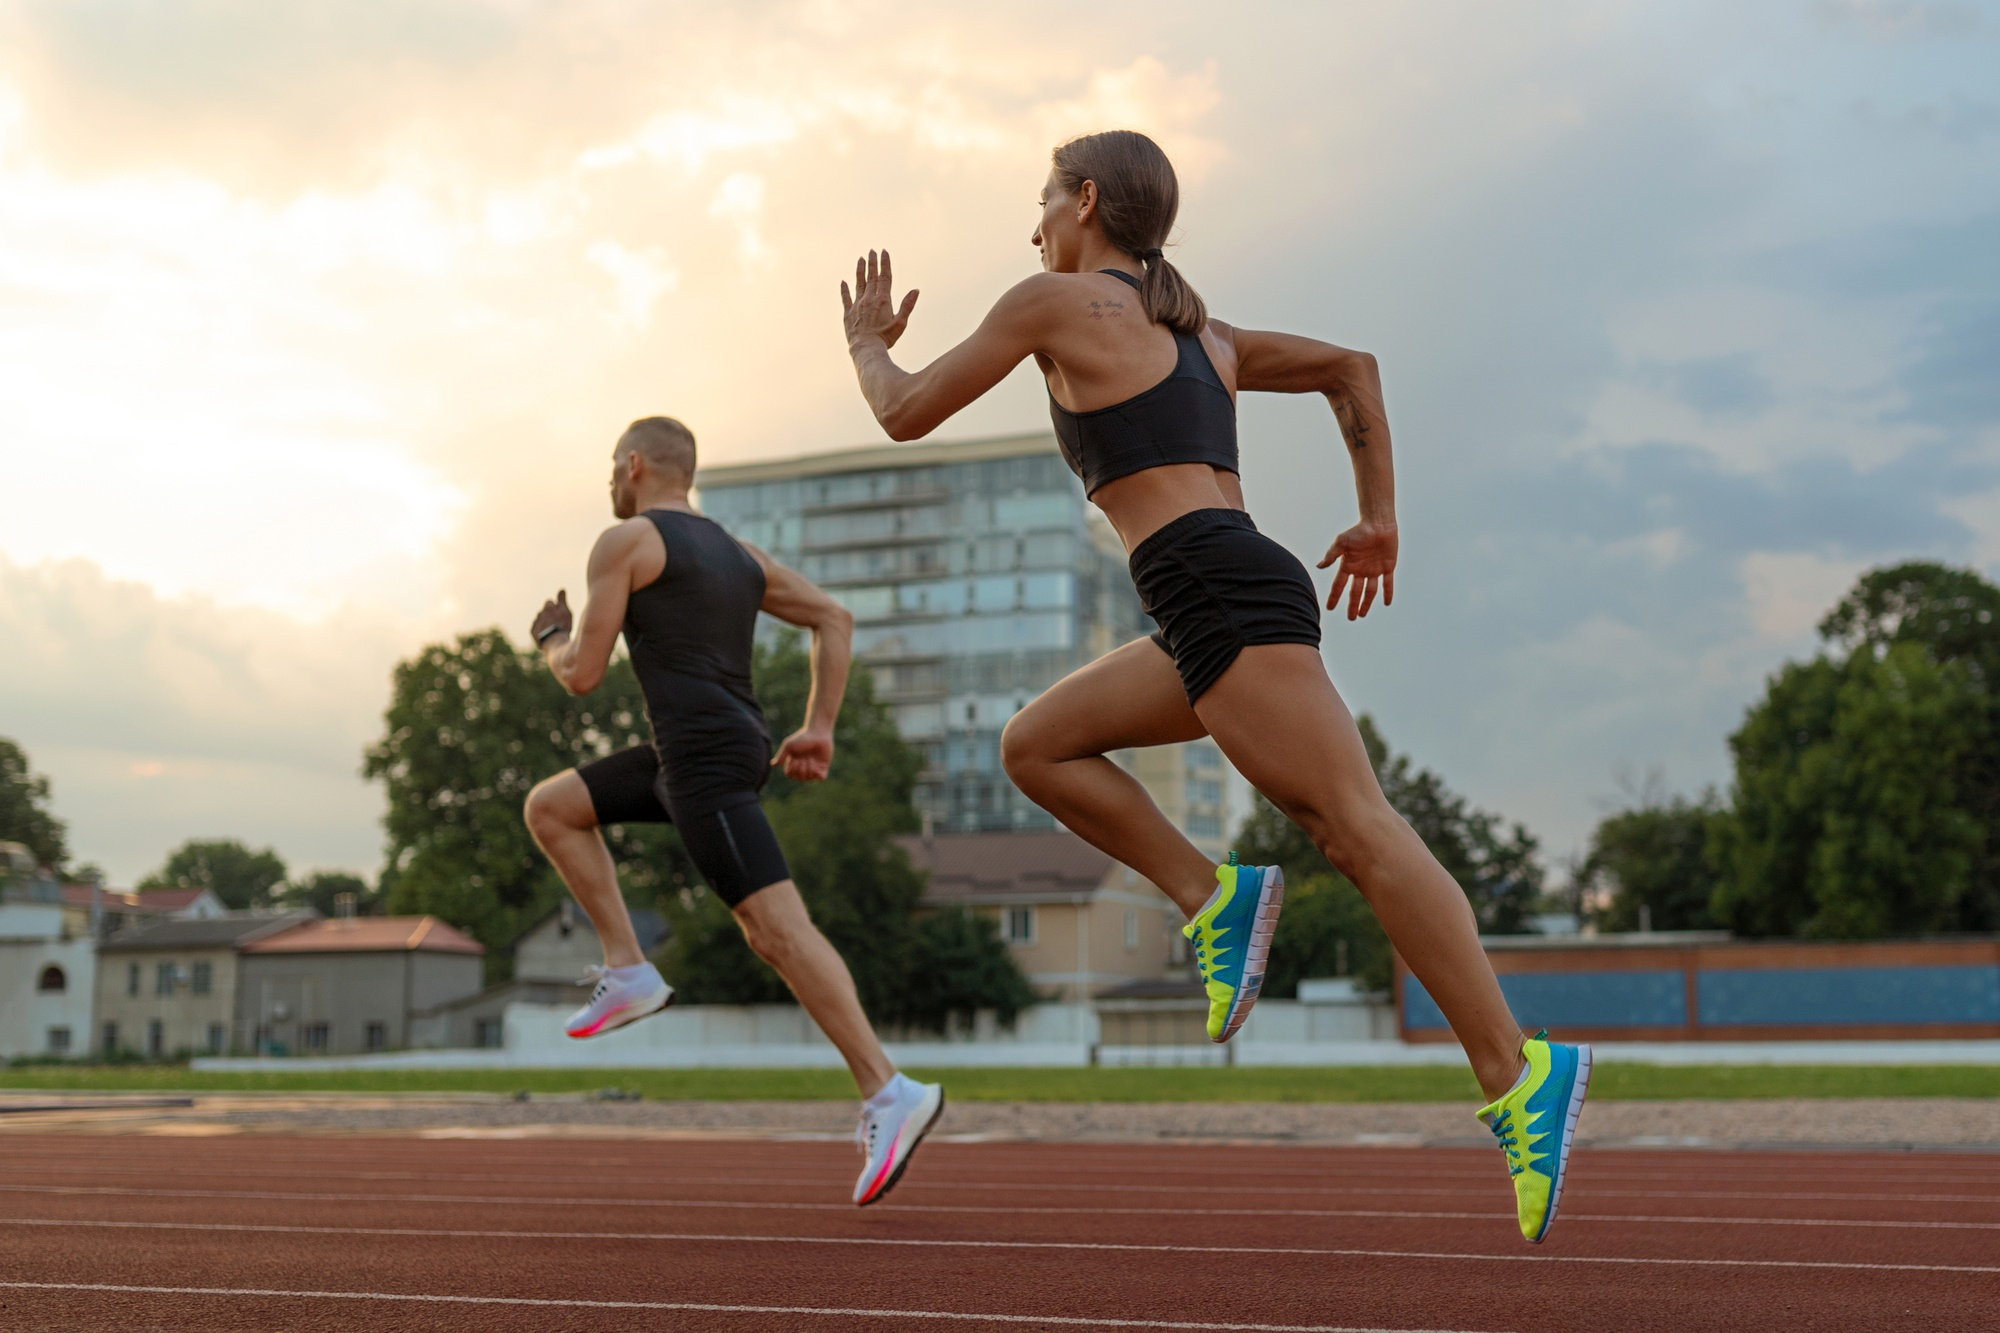 Can a Balanced Gut Microbiome Improve Athletic Performance?